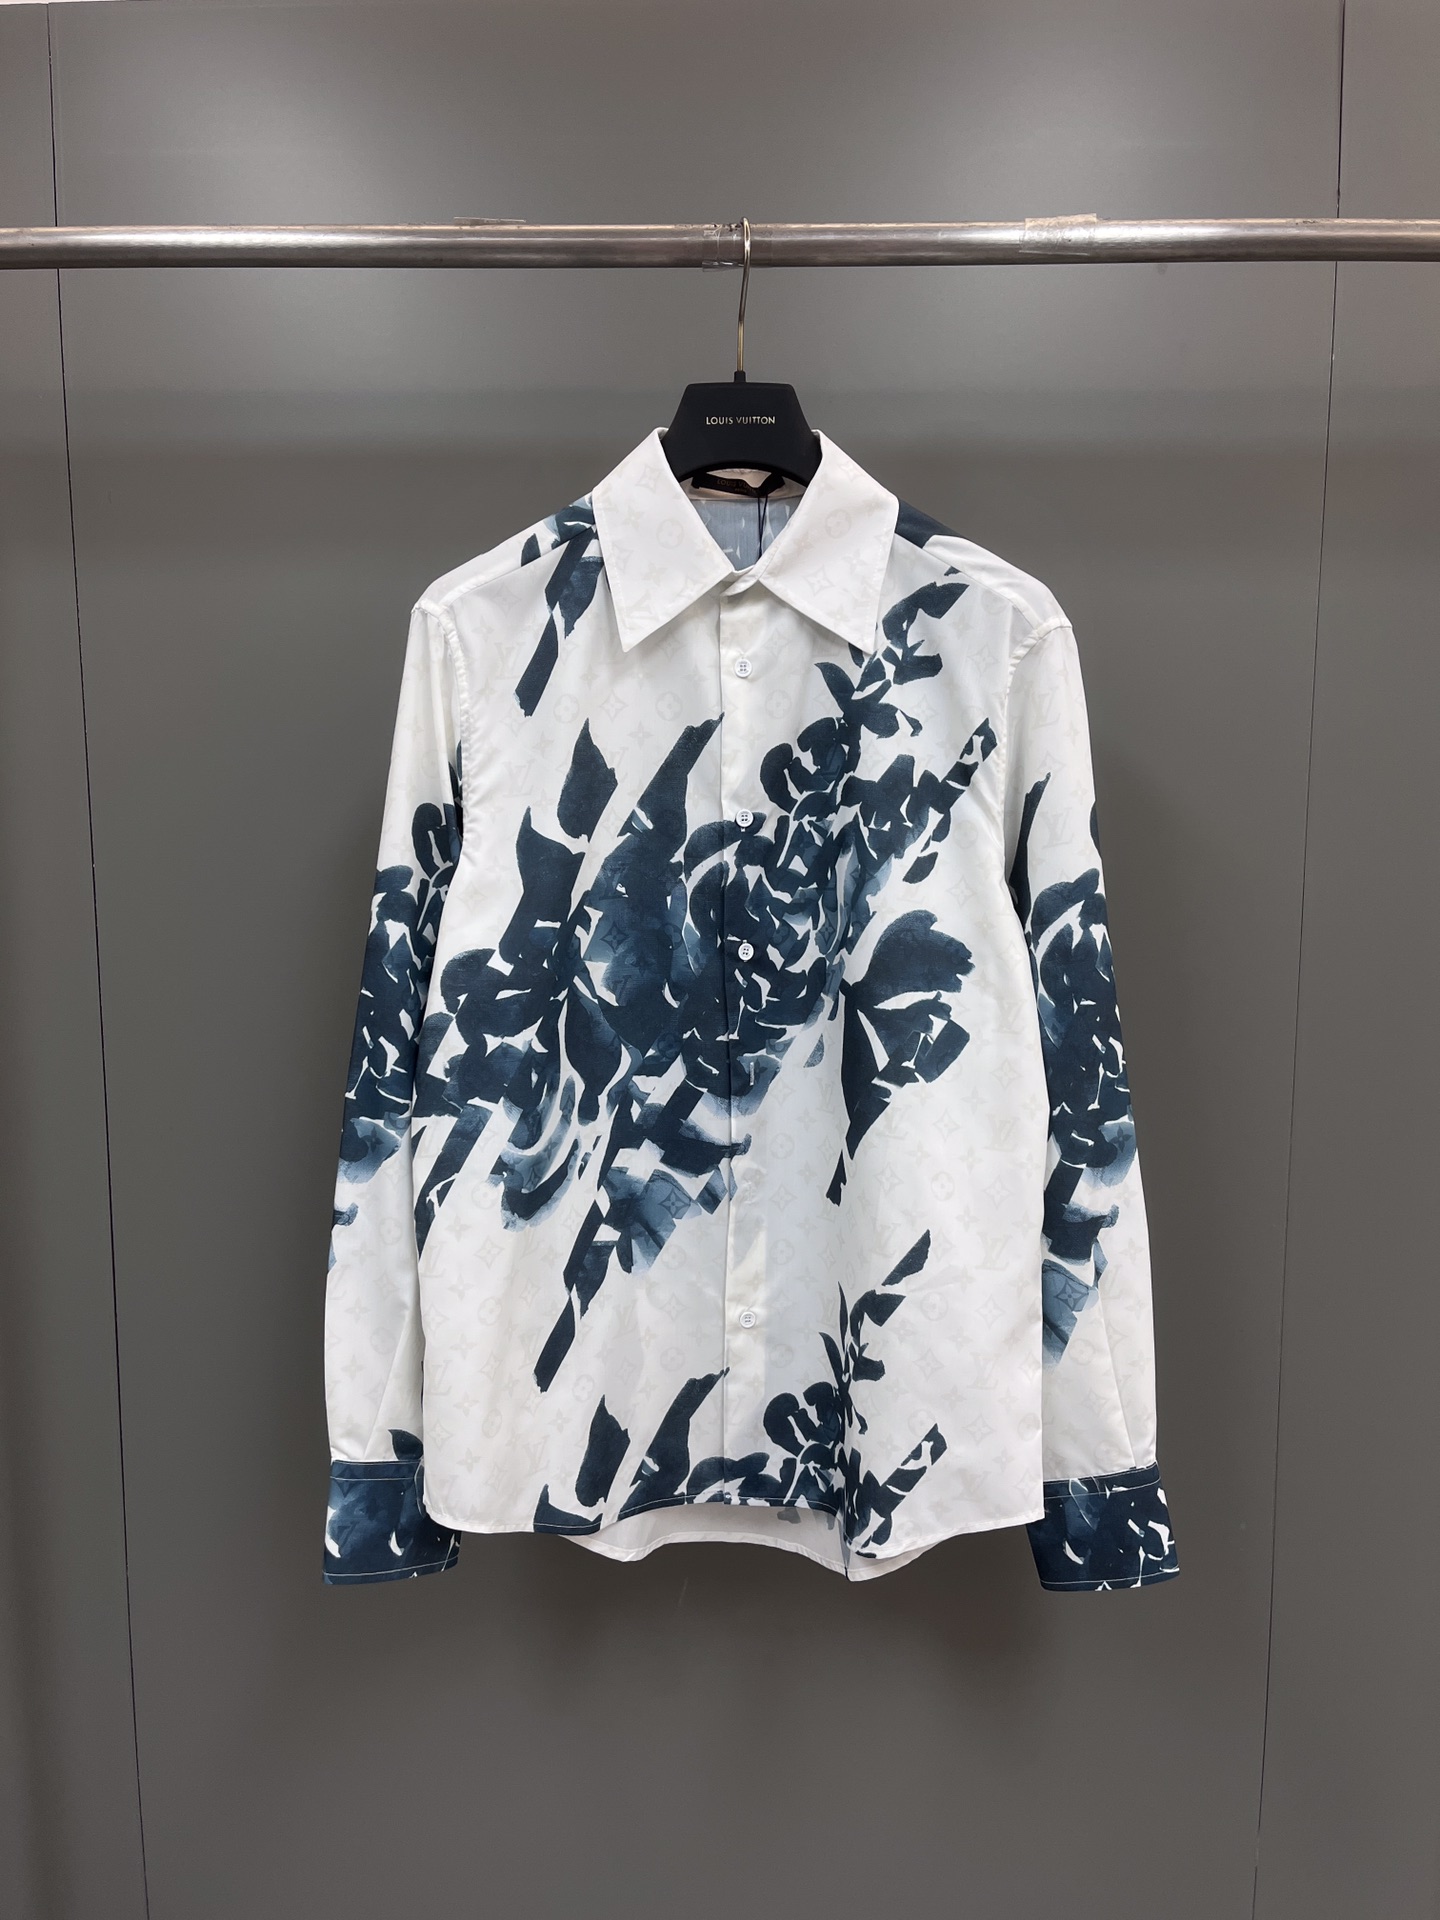 Louis Vuitton Clothing Shirts & Blouses Printing Cotton Polyester Poplin Fabric Fall/Winter Collection Long Sleeve